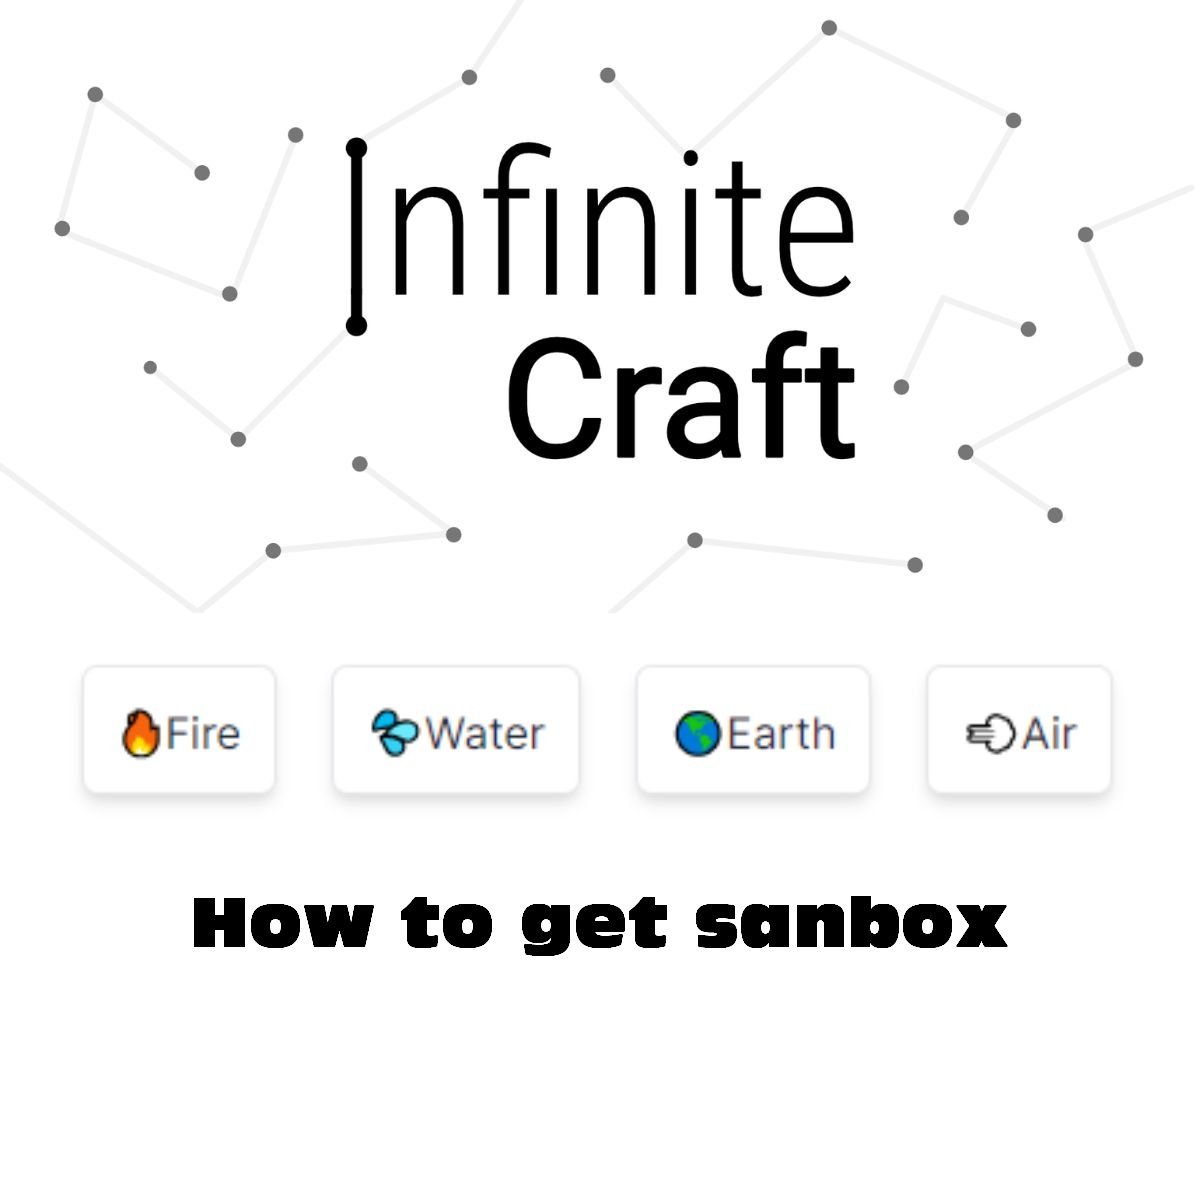 how to get sanbox in infinite craft